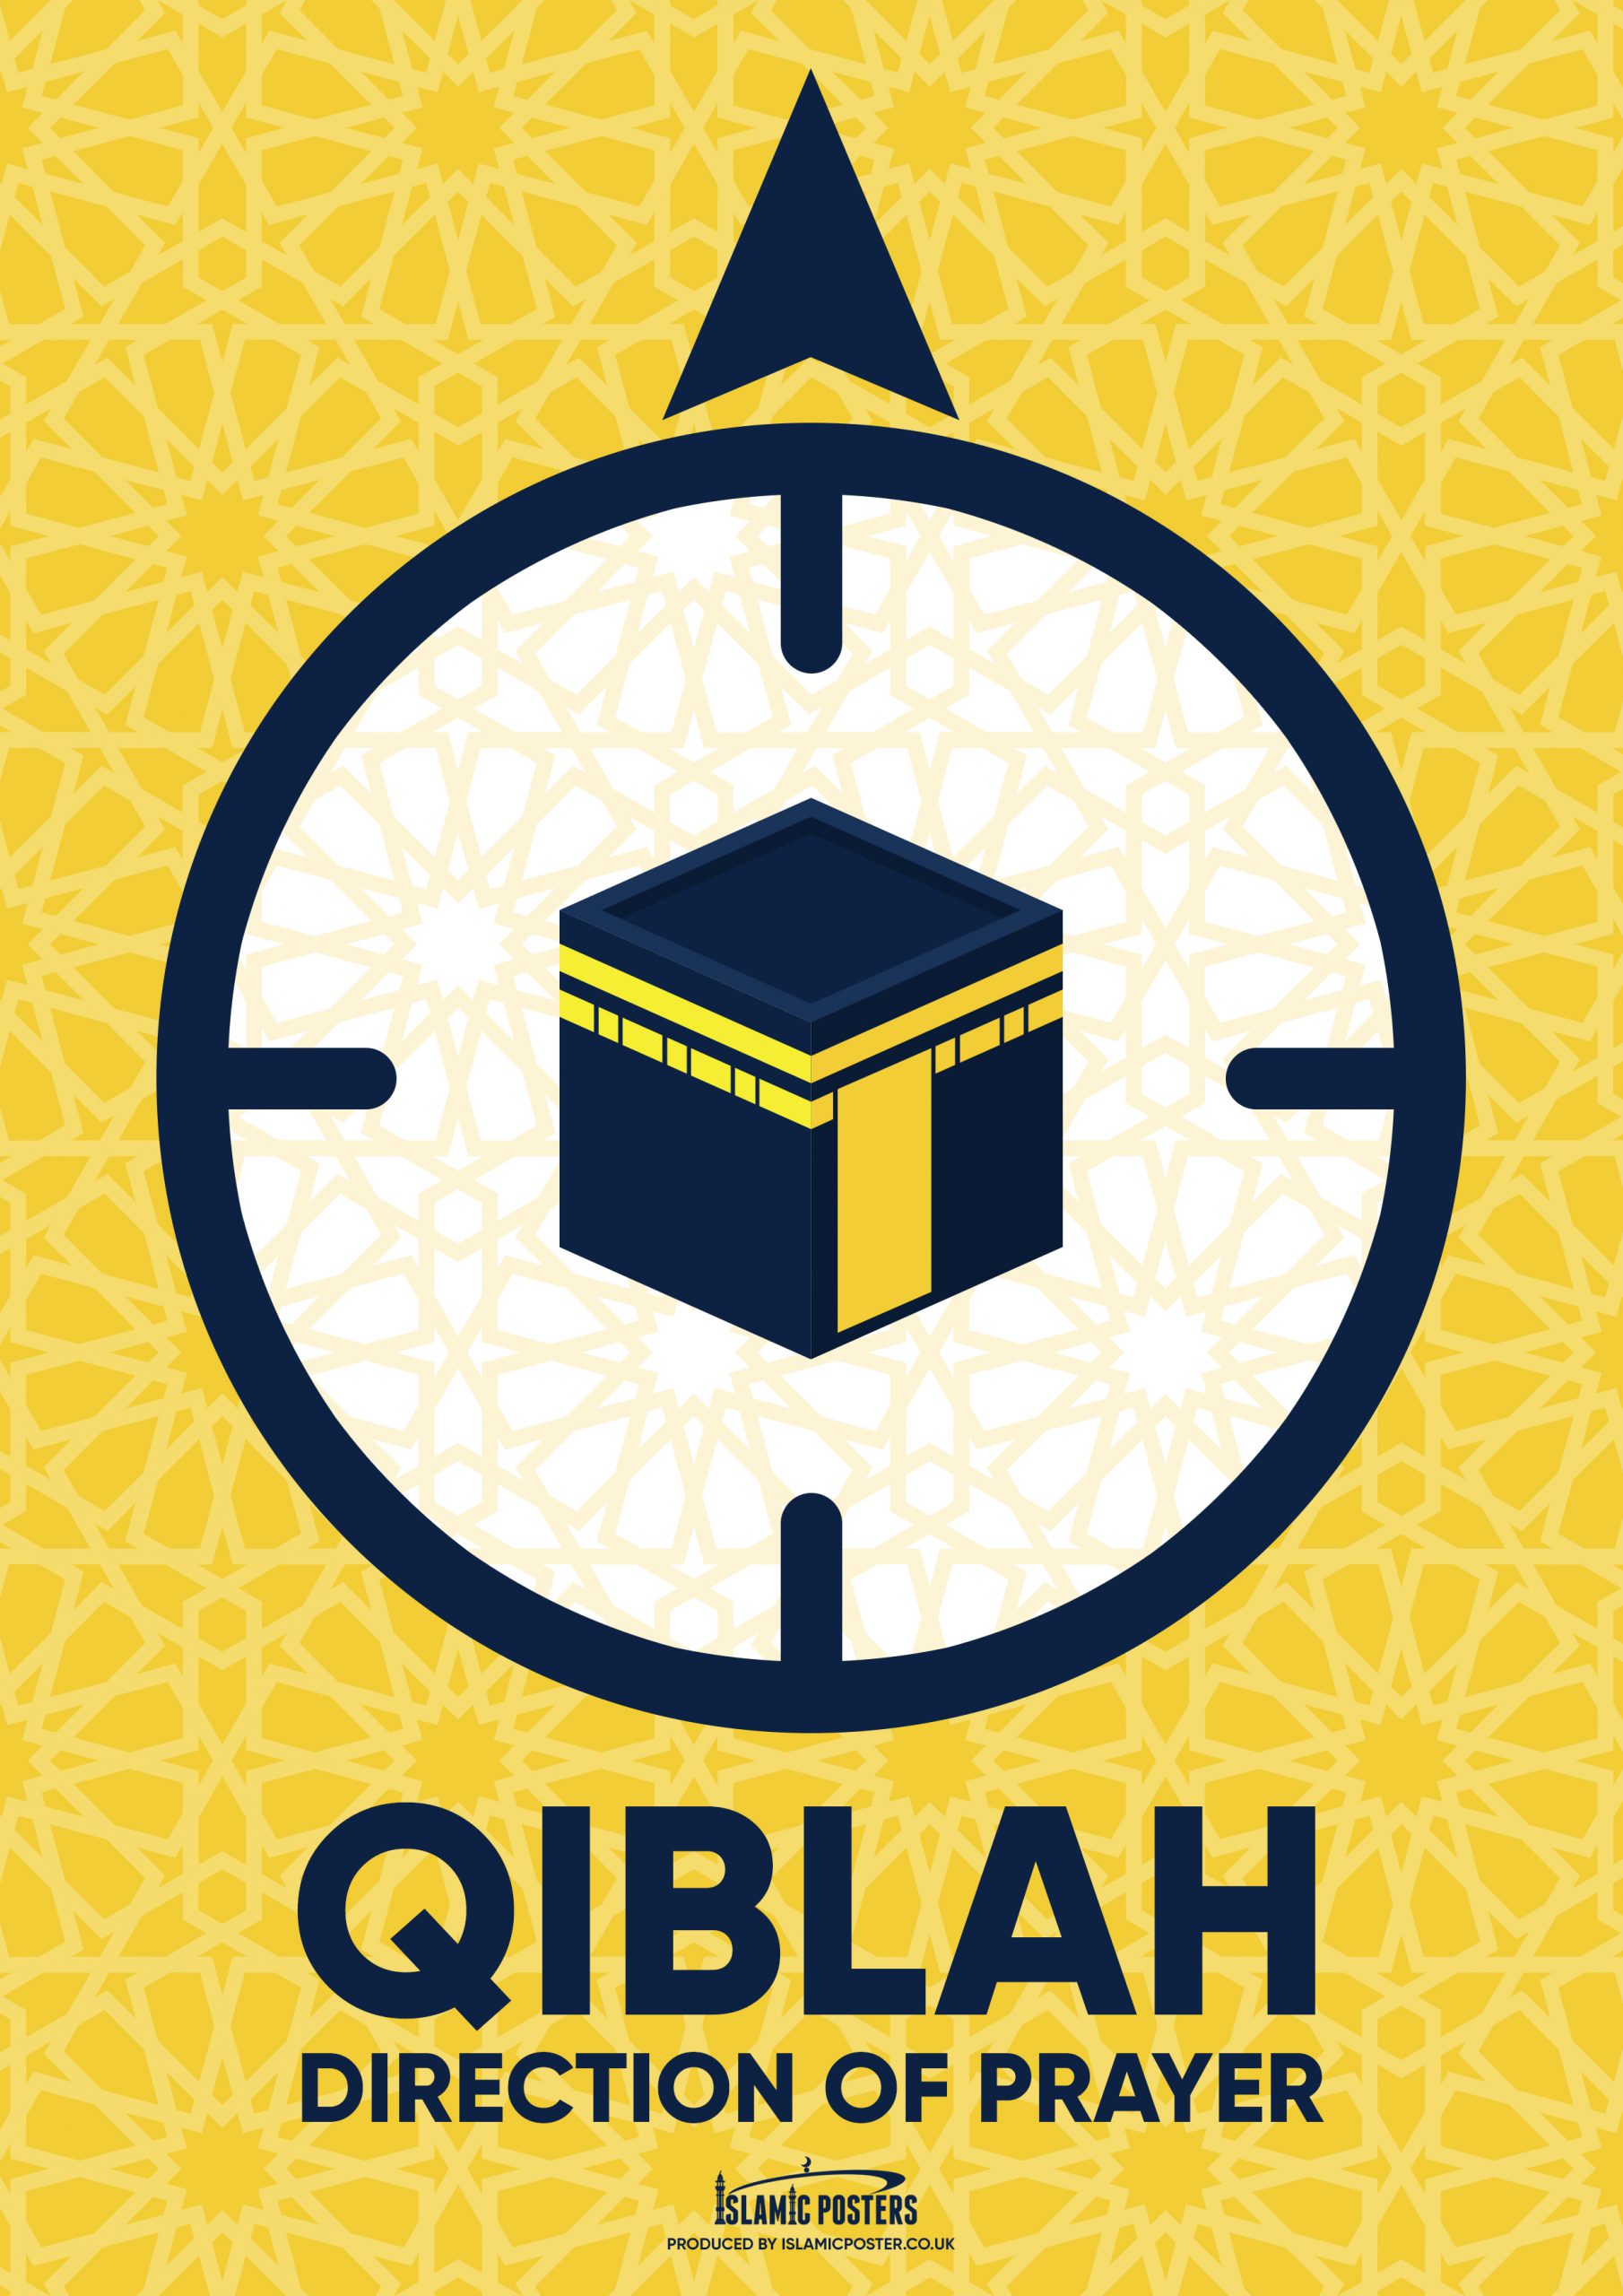 New 4 - Qiblah Pointer Poster By Islamic Posters